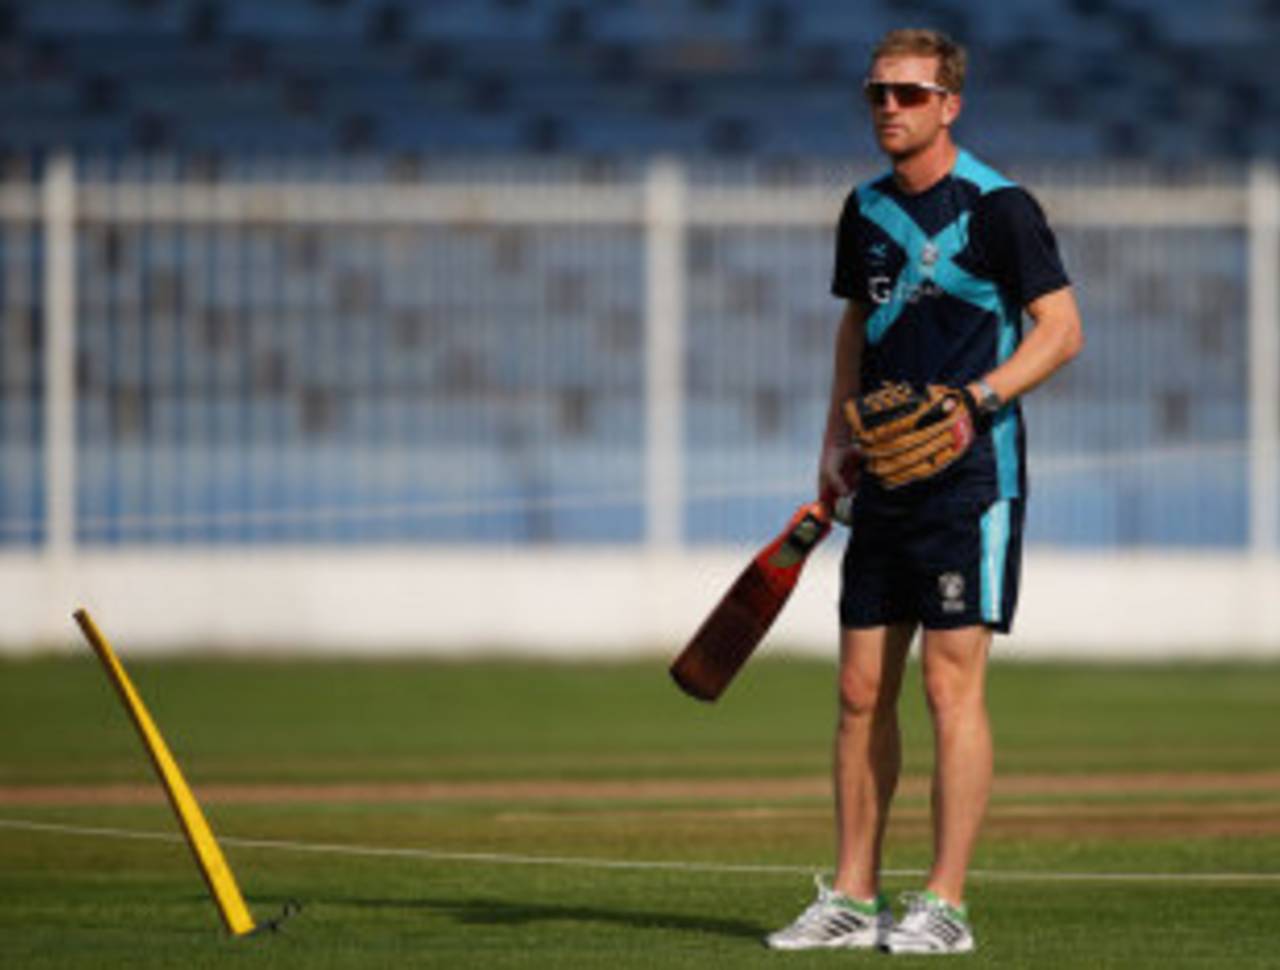 Paul Collingwood has won a temporary coaching role with England after guiding Scotland to the World Cup&nbsp;&nbsp;&bull;&nbsp;&nbsp;International Cricket Council